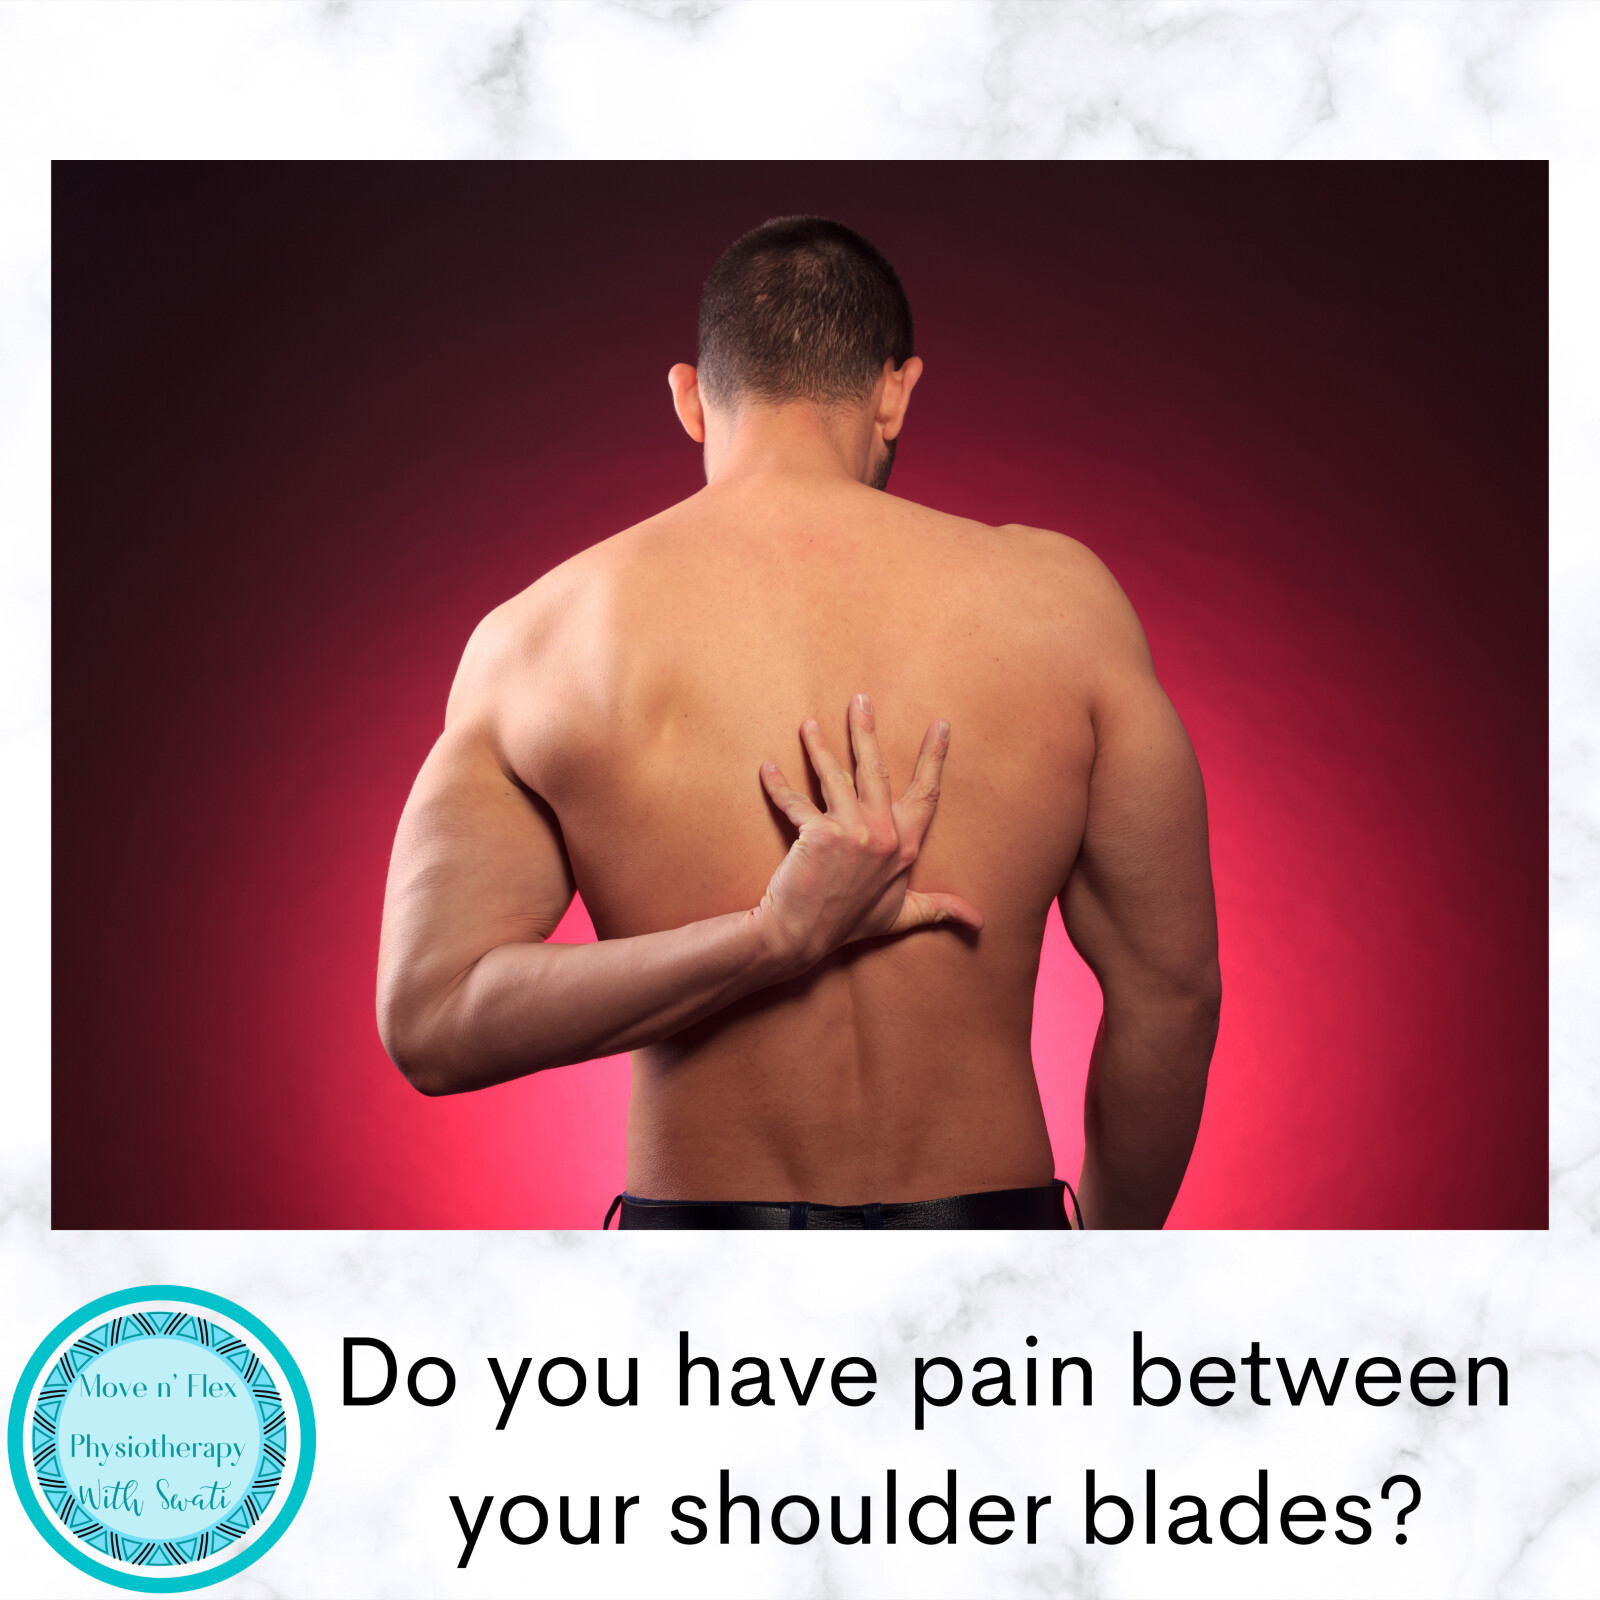 Five reasons why you get pain between the shoulder blades